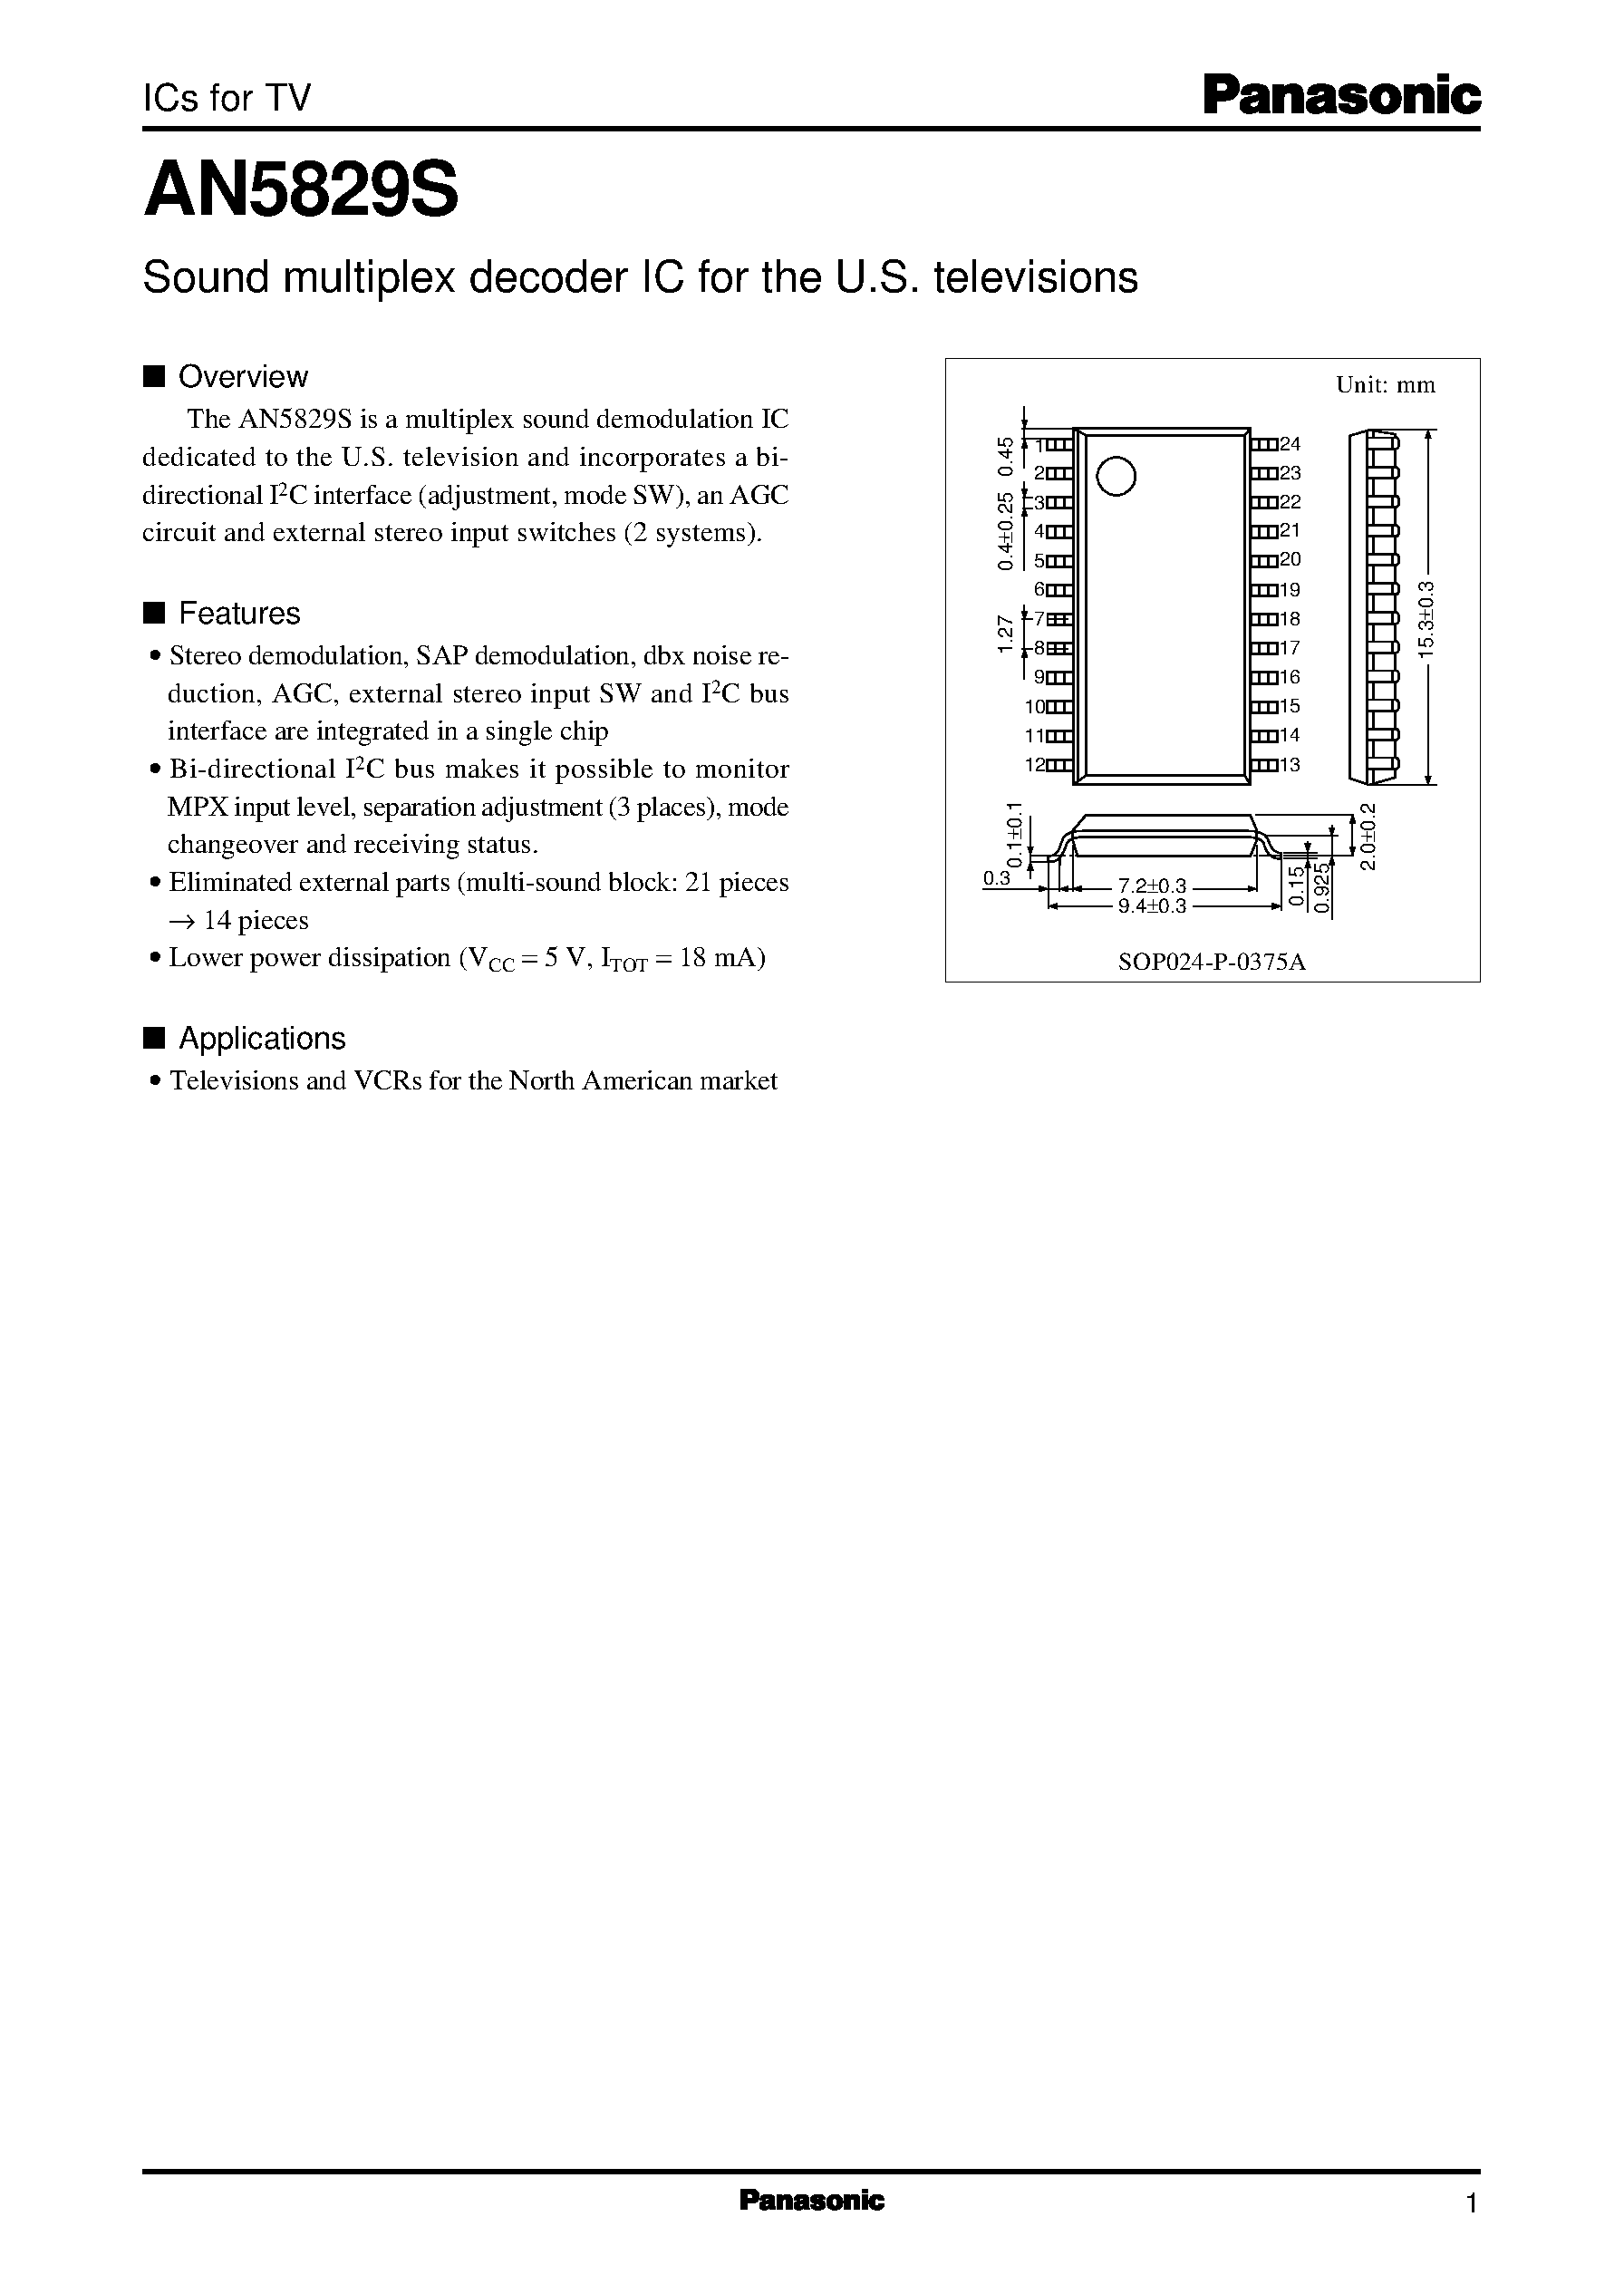 Datasheet AN5829S - Sound multiplex decoder IC for the U.S. televisions page 1